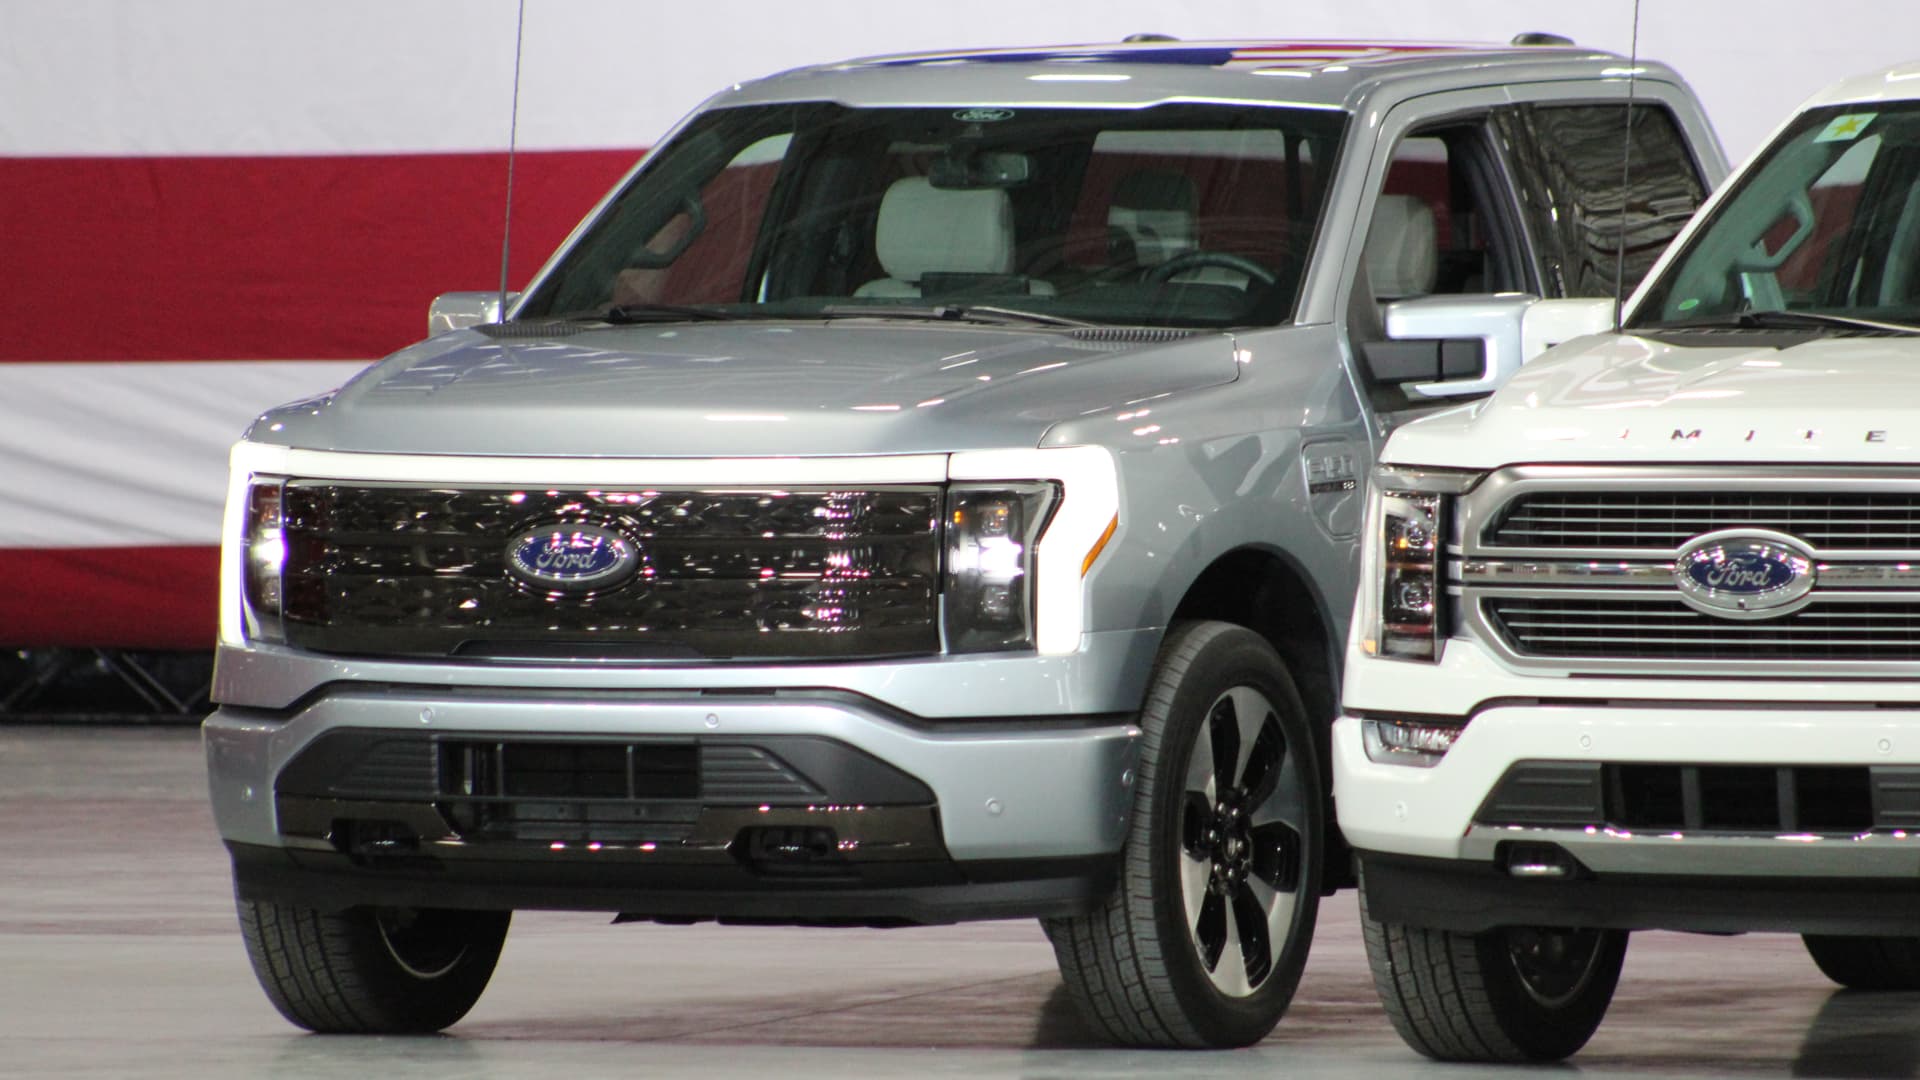 Ford displayed the new electric F-150 Lightning pickup ahead of its official reveal Wednesday night during a visit by President Joe Biden to the plant in Michigan that will produce the vehicle beginning next year.